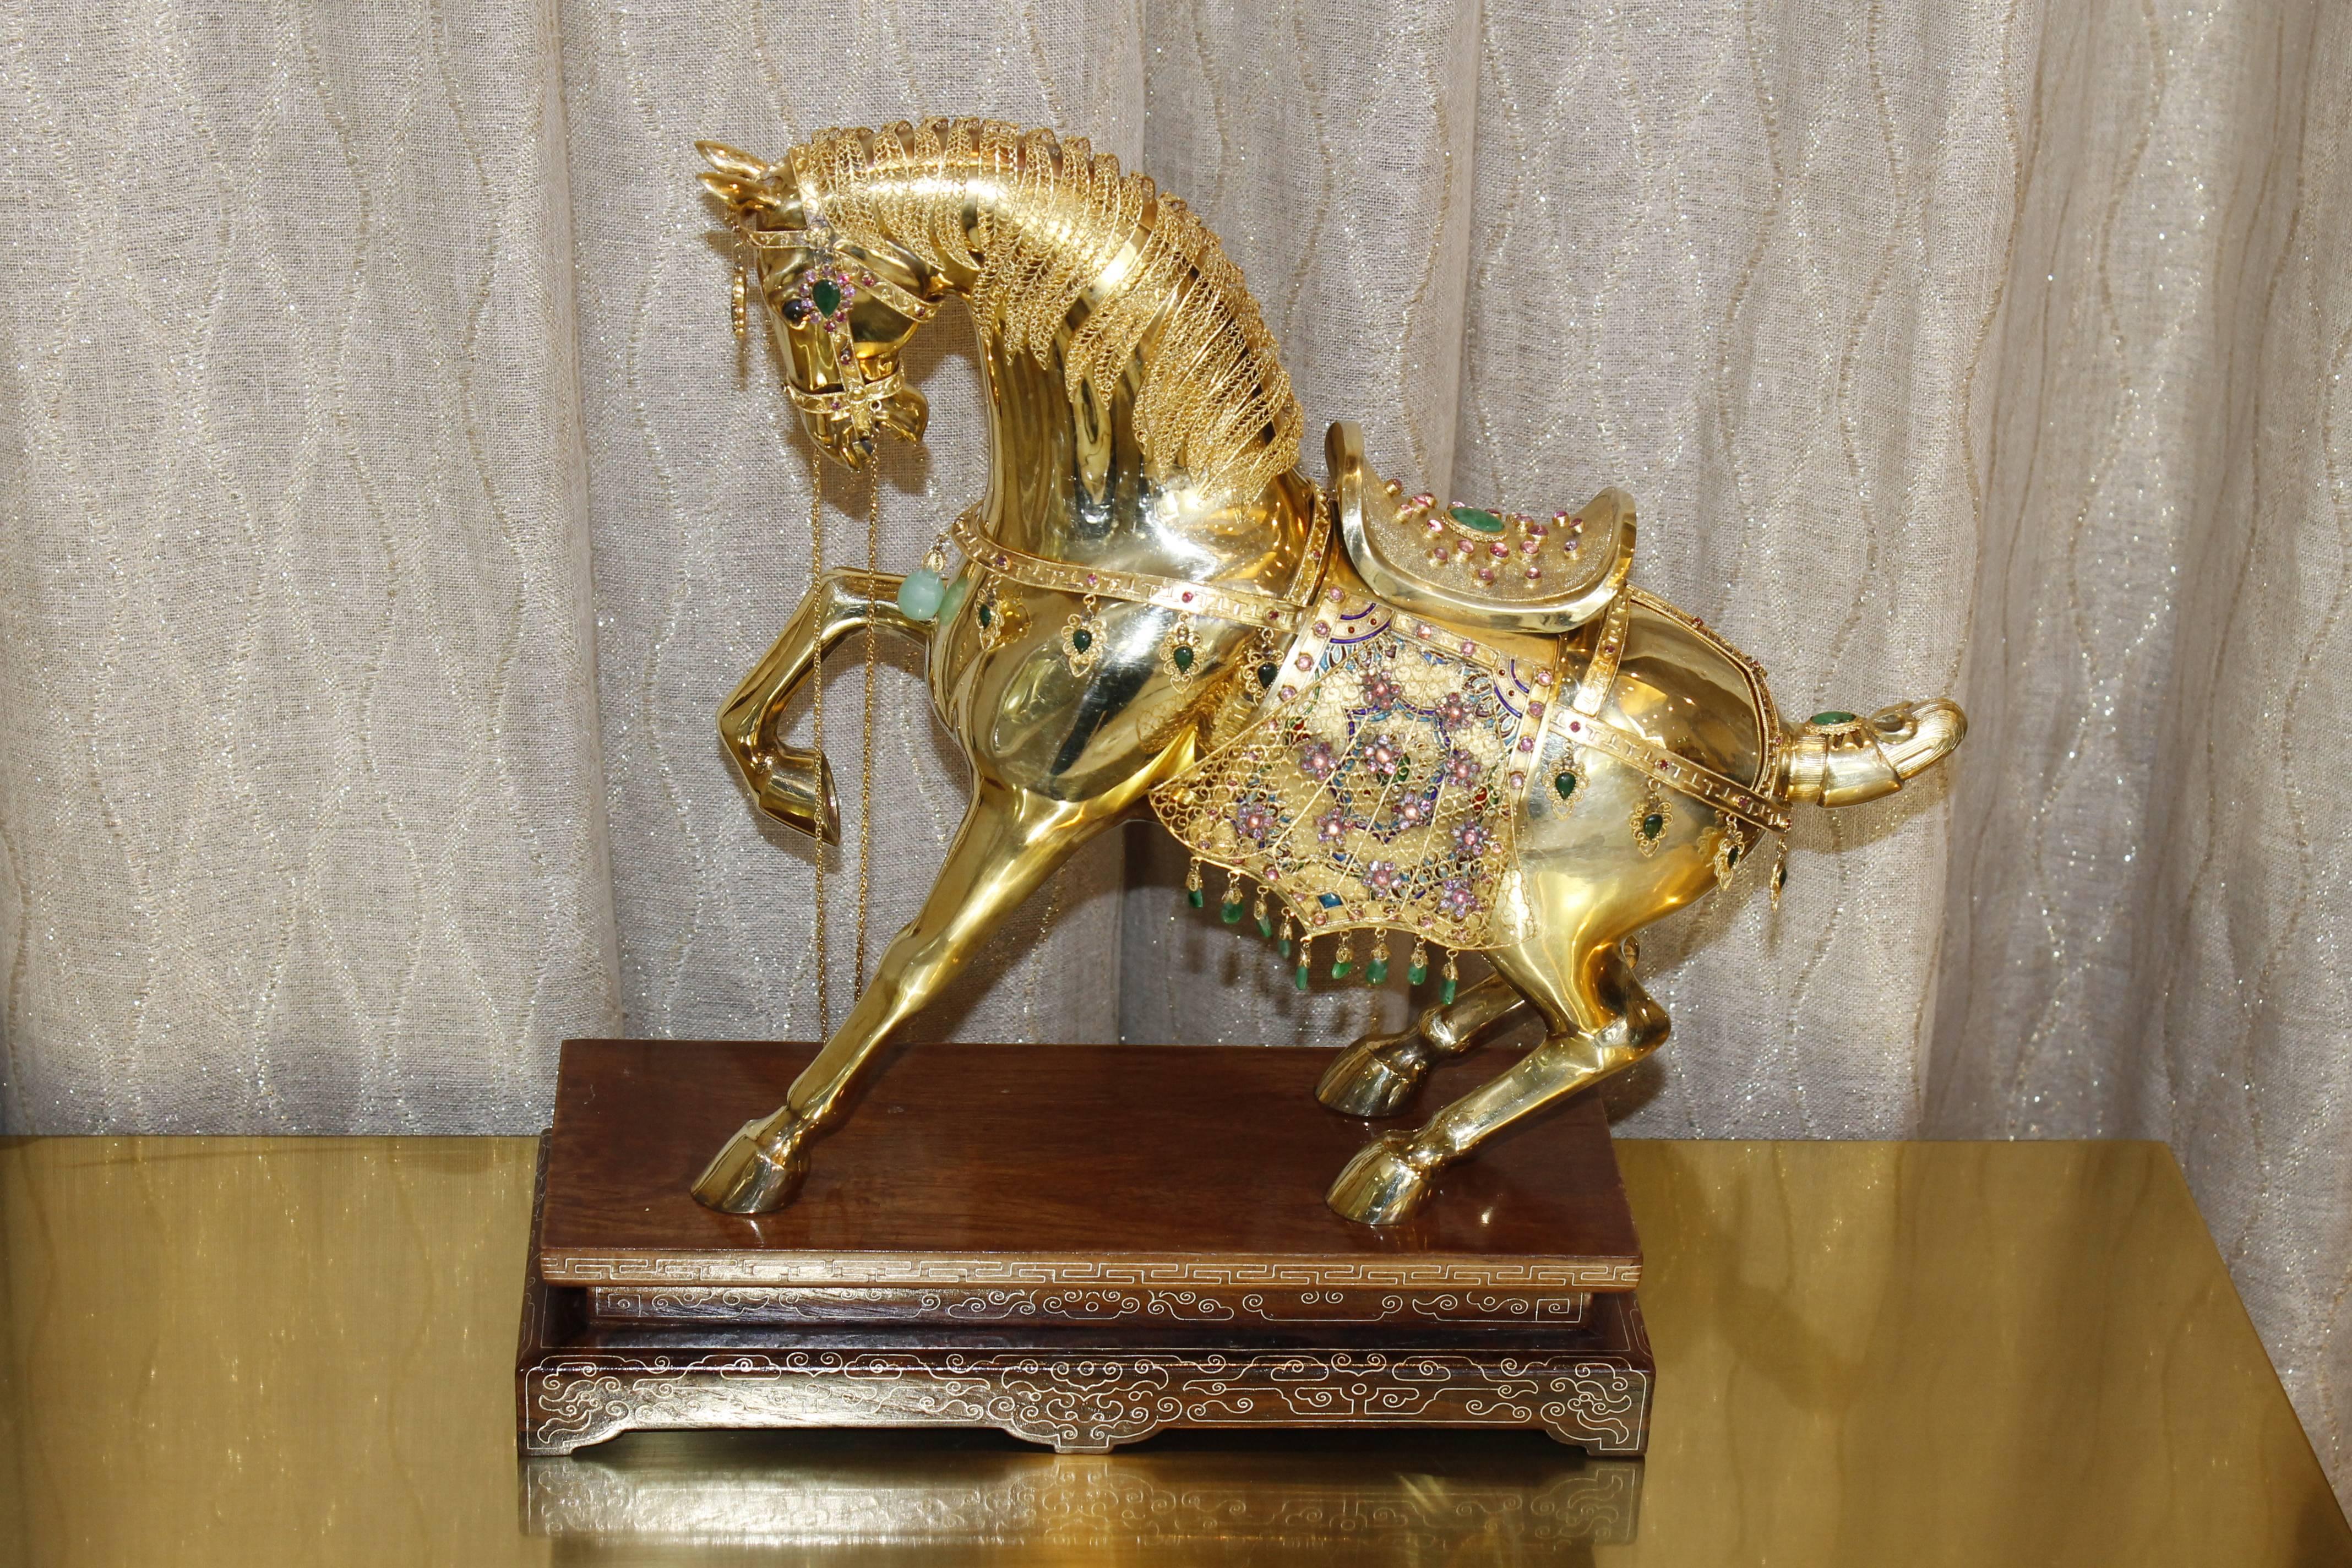 on a stepped wood base
stamped 14K under hoof

Note: the horse is affixed to the base and cannot be removed without destroying the integrity of the piece

12 inches wide; 10 1/4 inches high